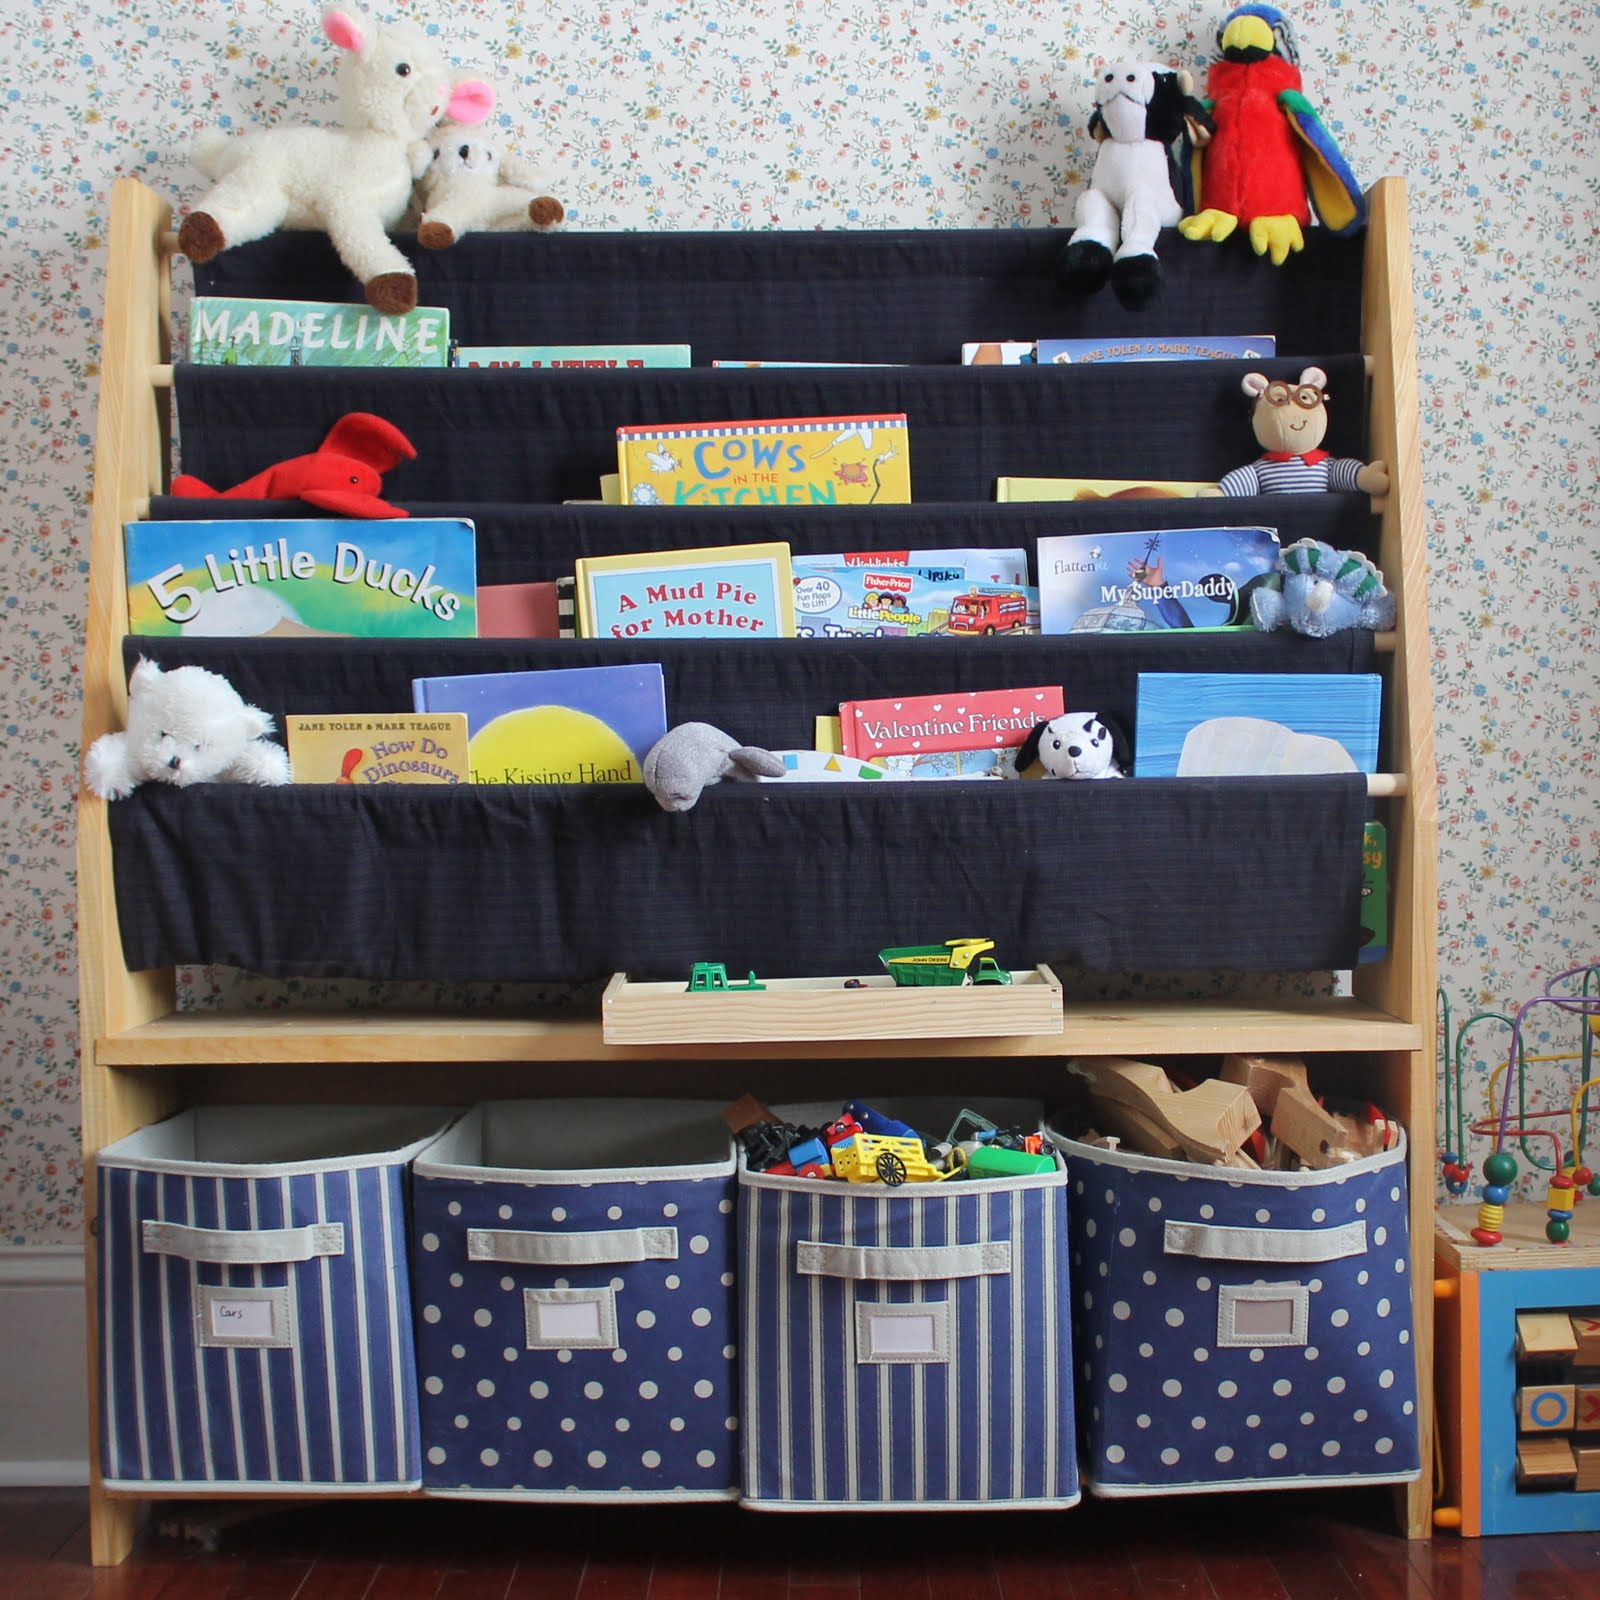 Born Imaginative Sling Bookshelf With Storage Bins For Kids pertaining to dimensions 1600 X 1600